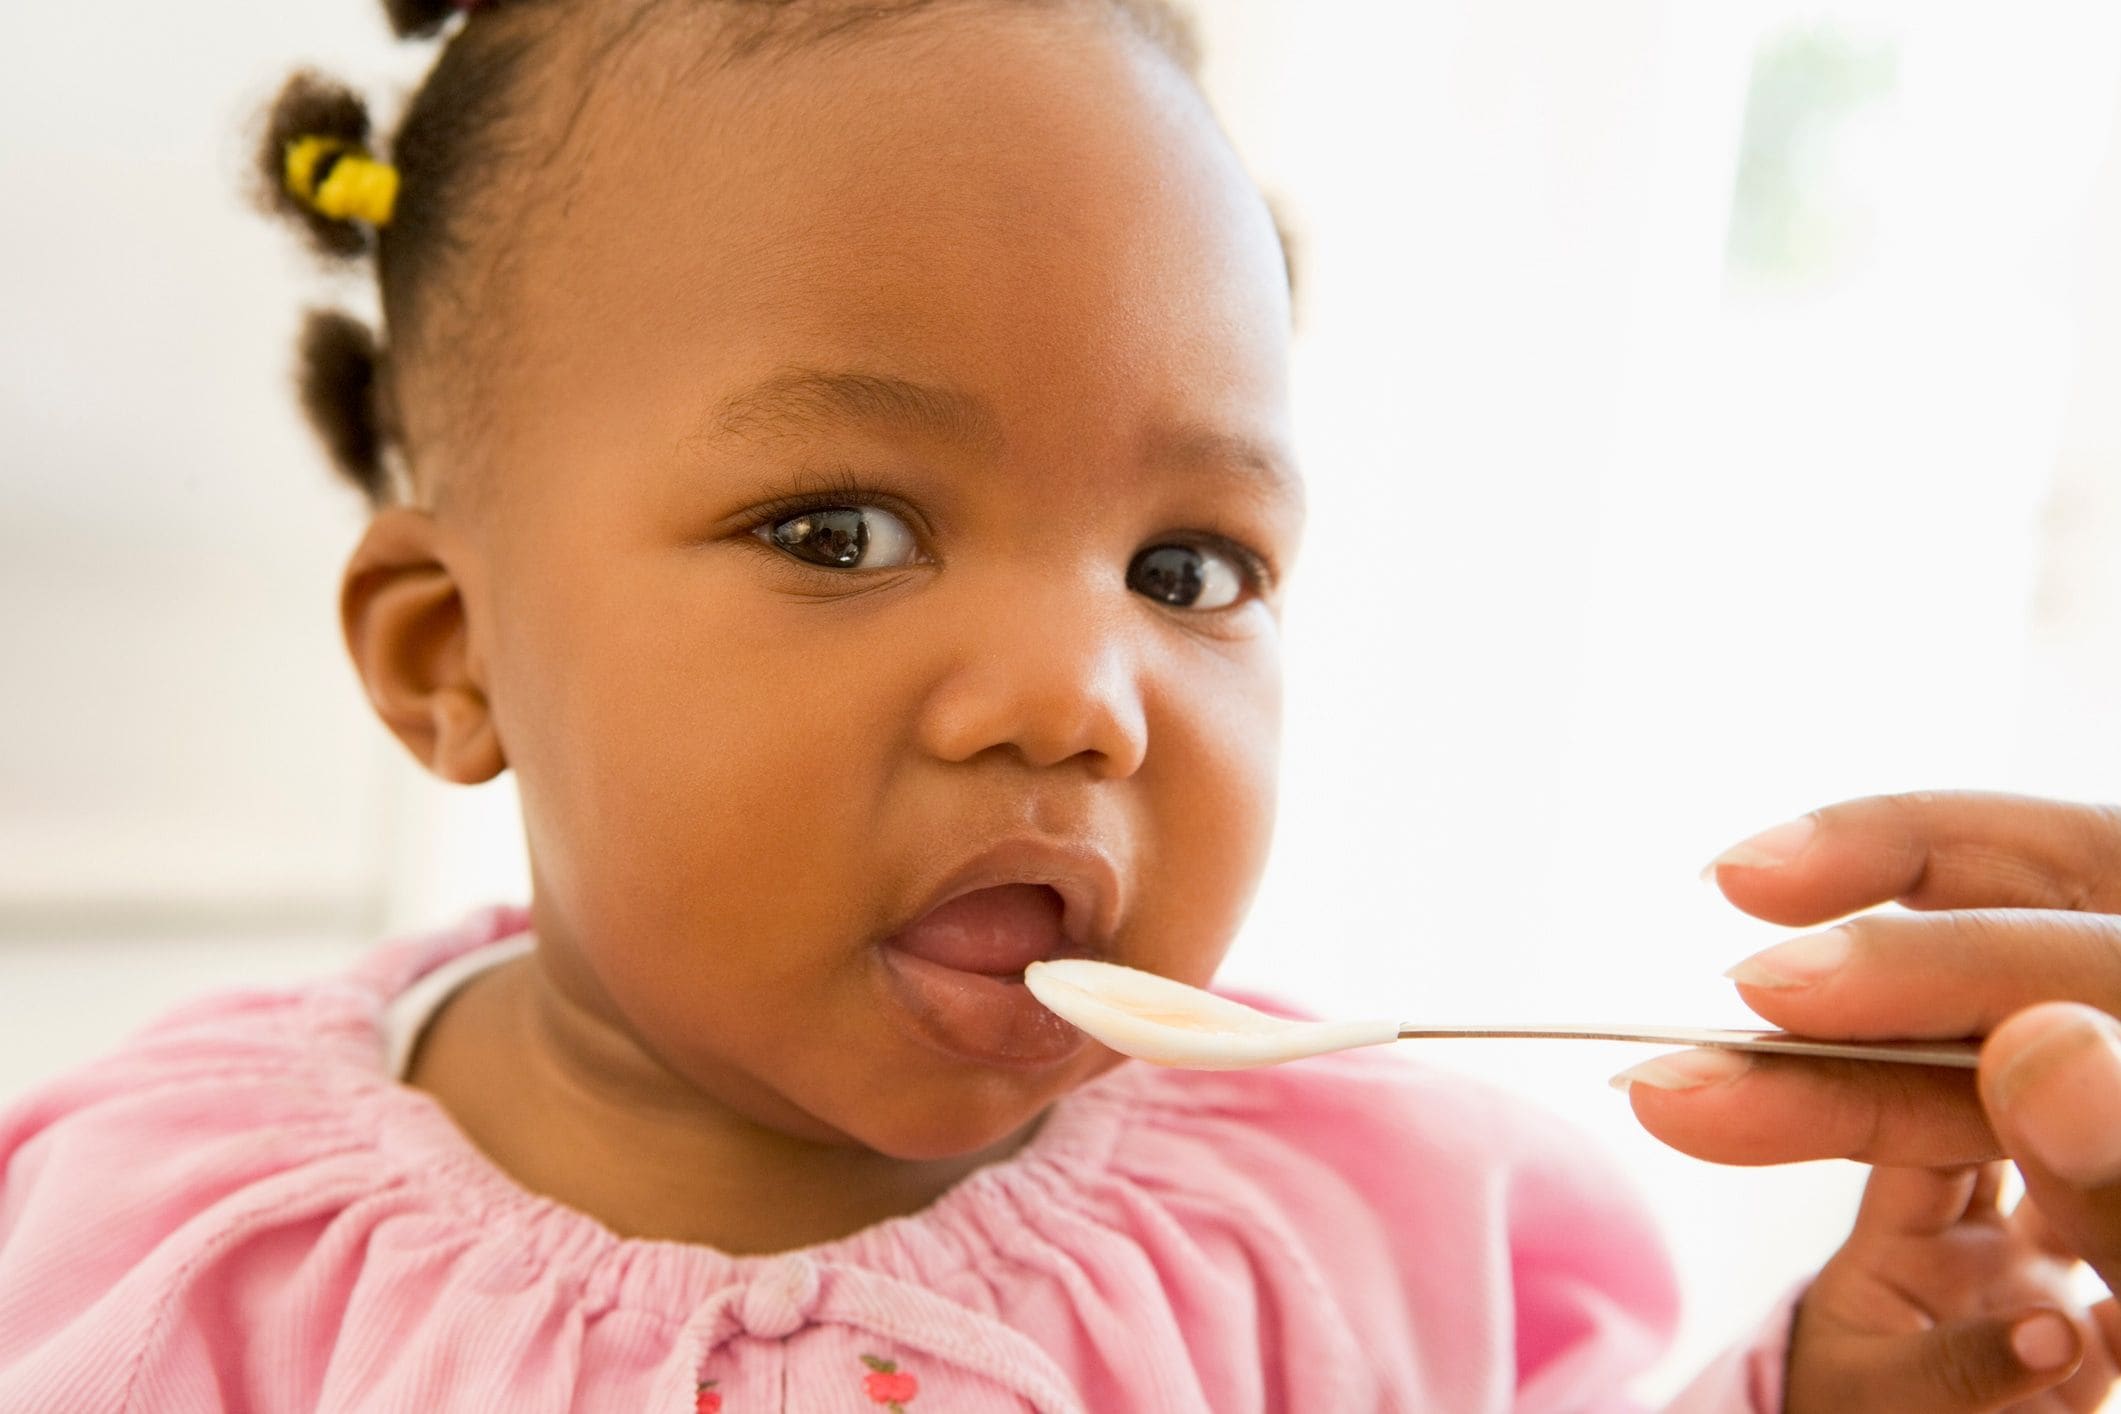 Let's talk about transitioning to baby foods